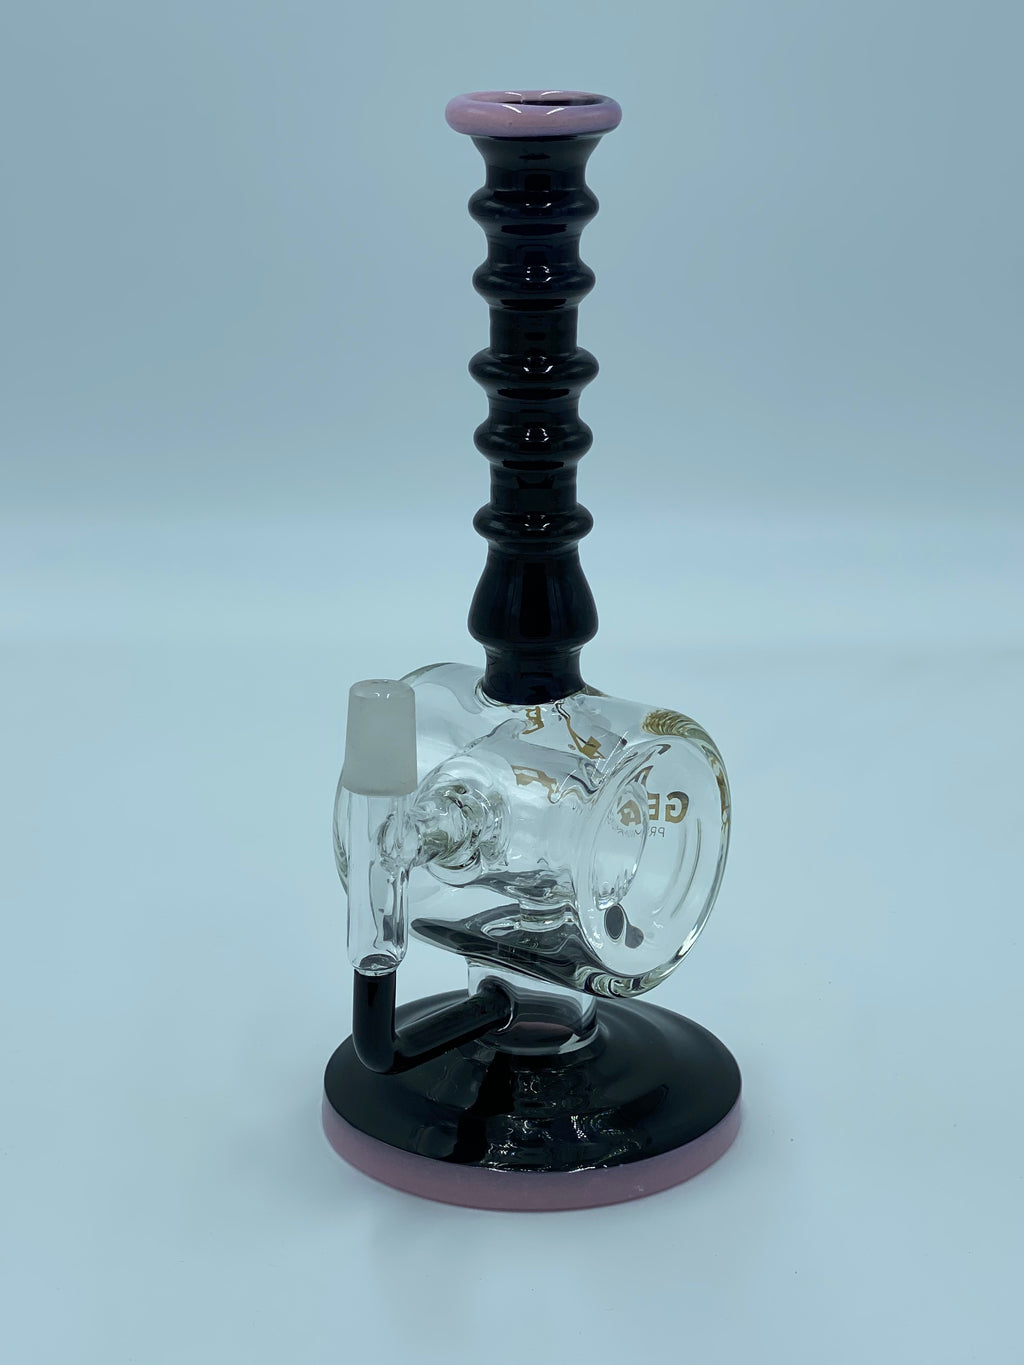 GEAR PREMIUM DRUM RIG - Smoke Country - Land of the artistic glass blown bongs